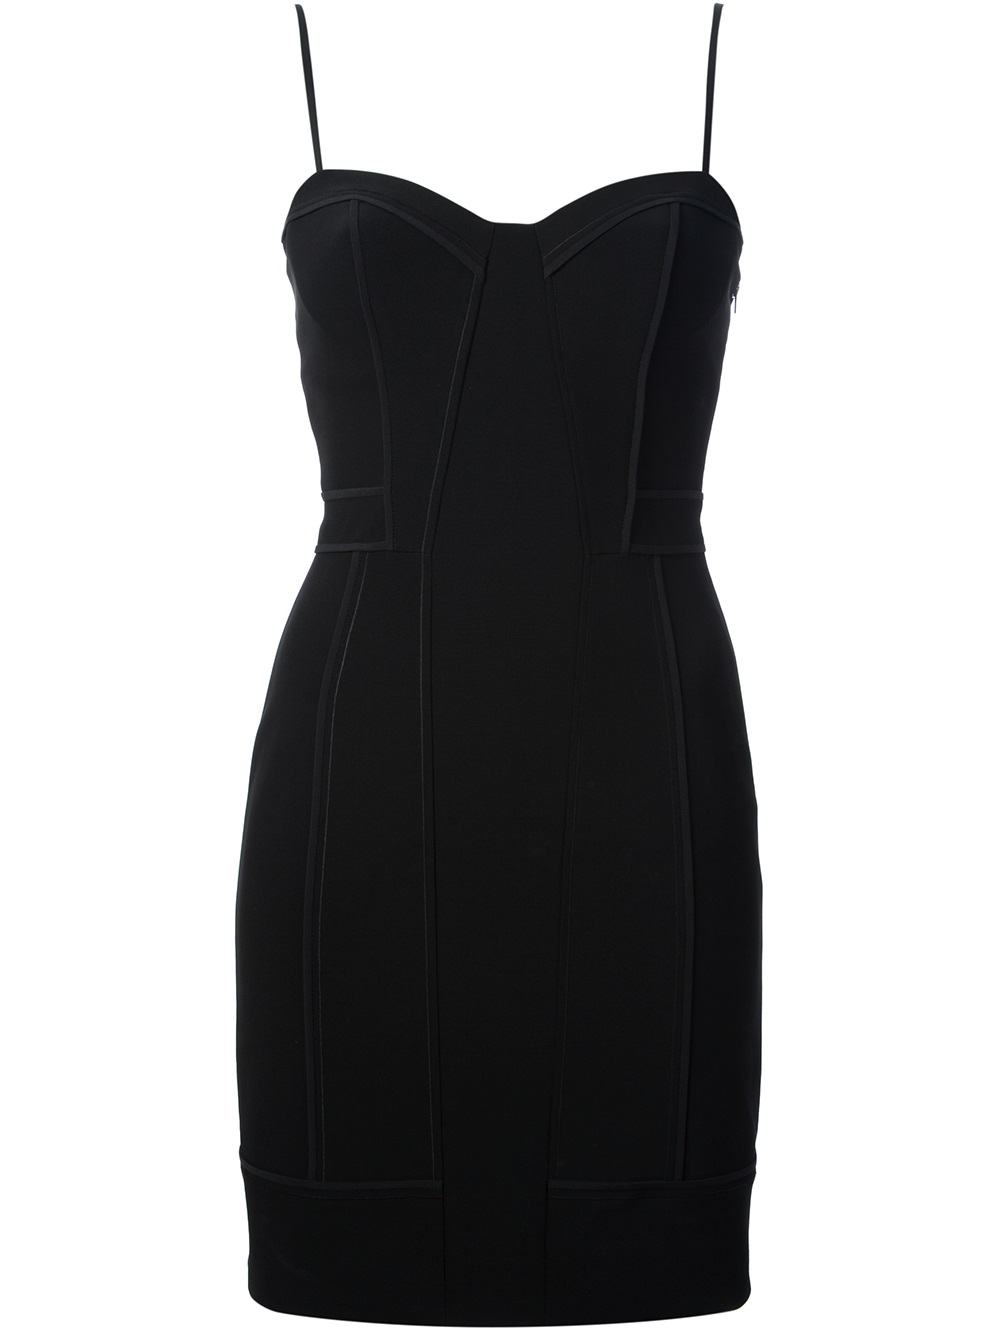 Alexander wang Fitted Spaghetti Strap Dress in Black | Lyst